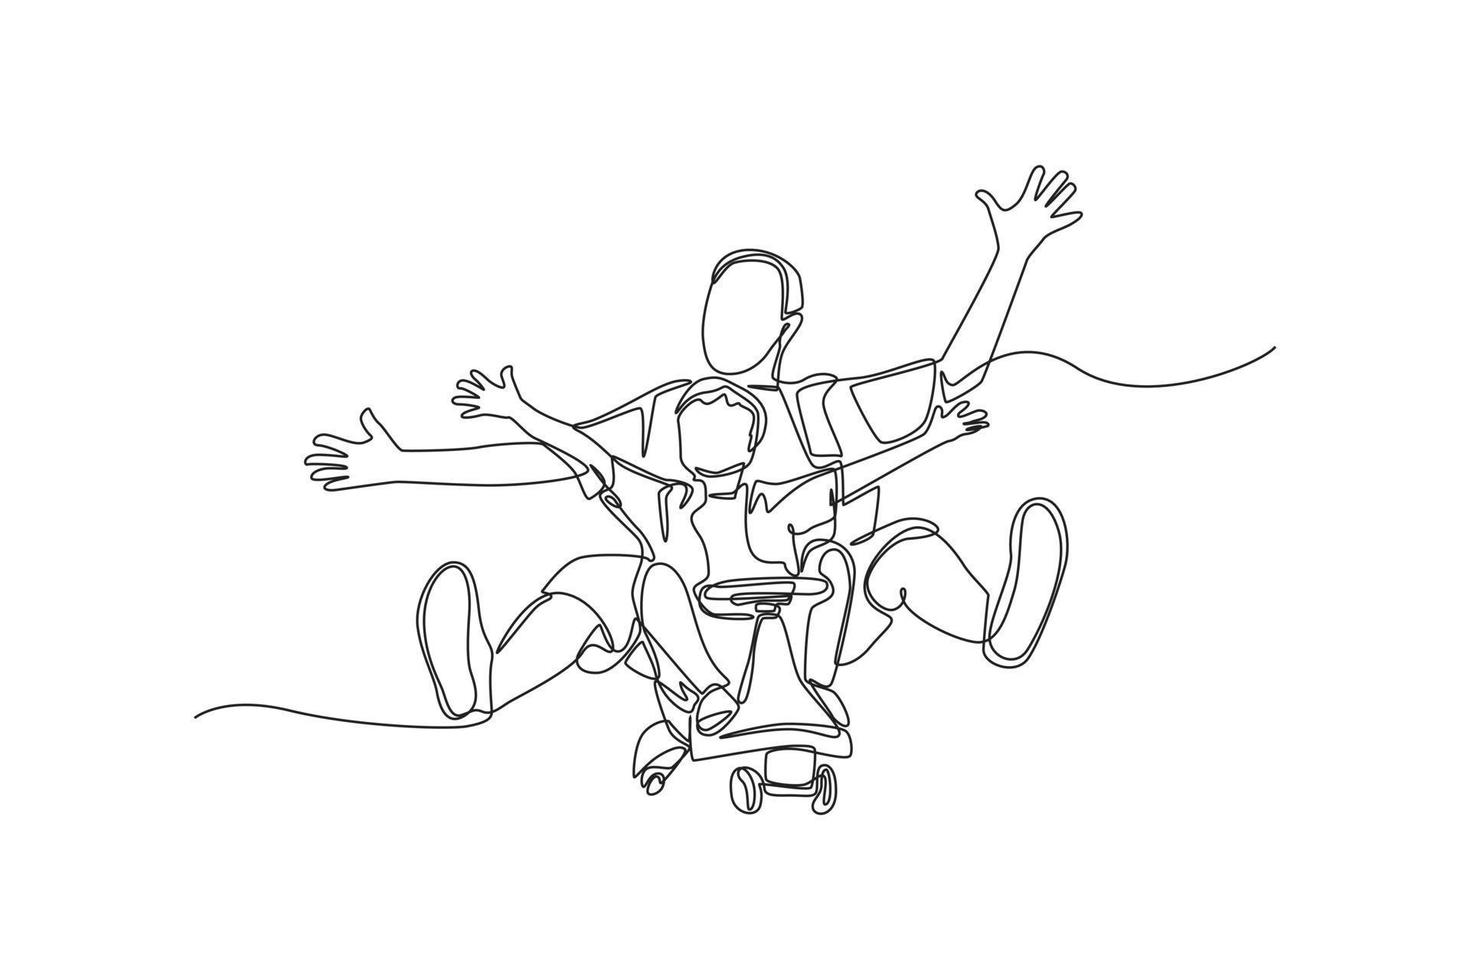 Single one line drawing Father and son playing with go kart on the road. Family time concept. Continuous line draw design graphic vector illustration.